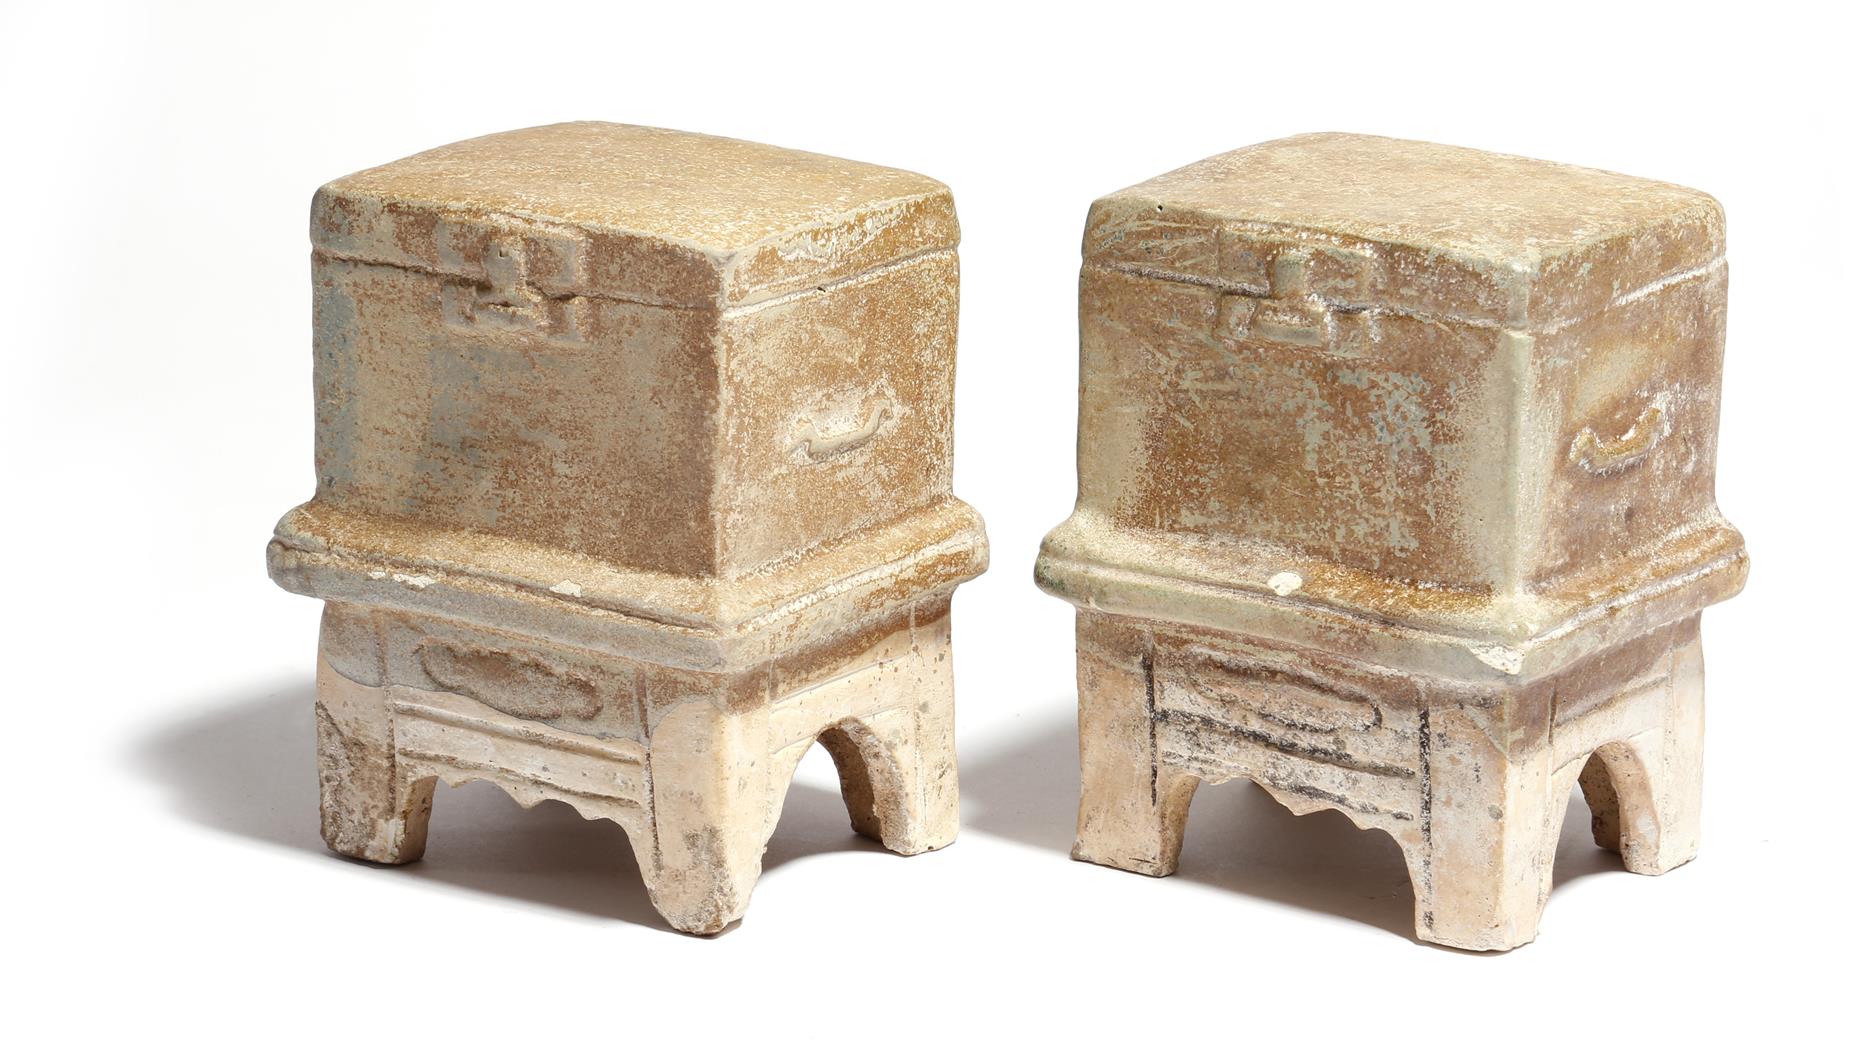 A pair of Chinese pottery models of votive chests in Han Dynasty style, partly glazed, probably Ming